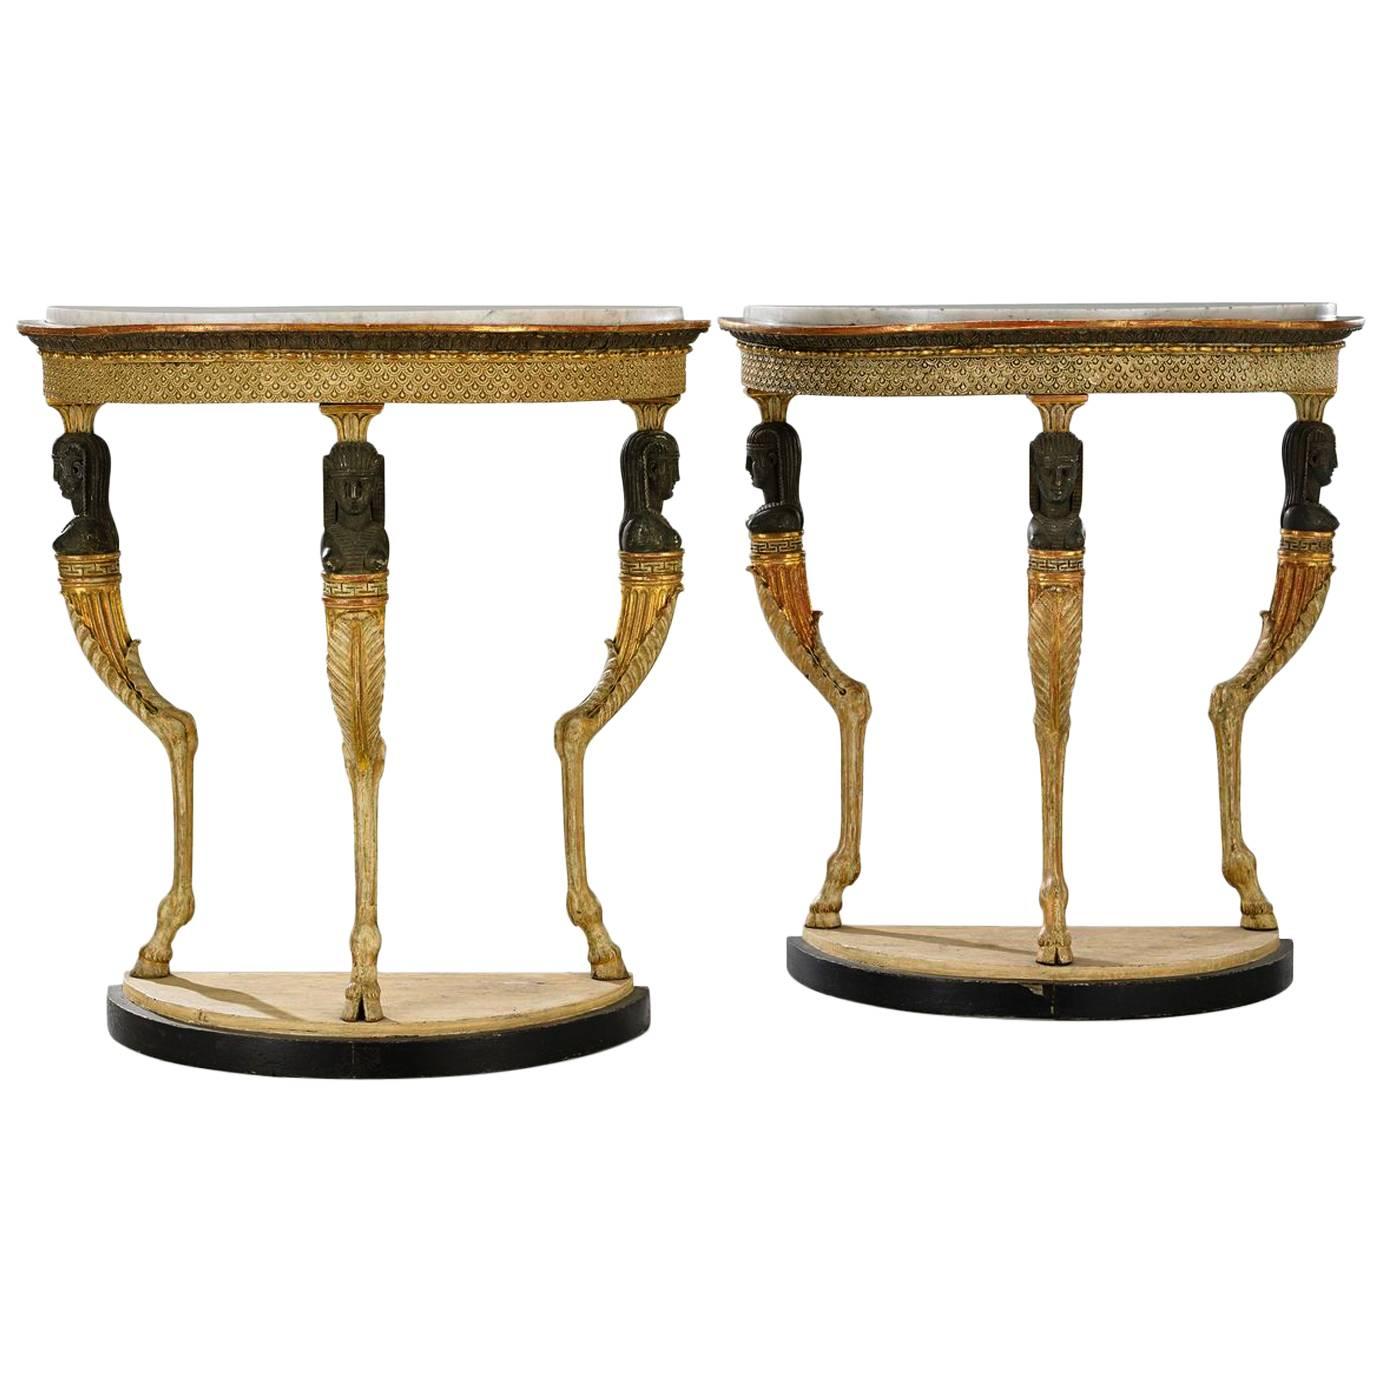 Pair of Important Swedish Demilune Console Tables